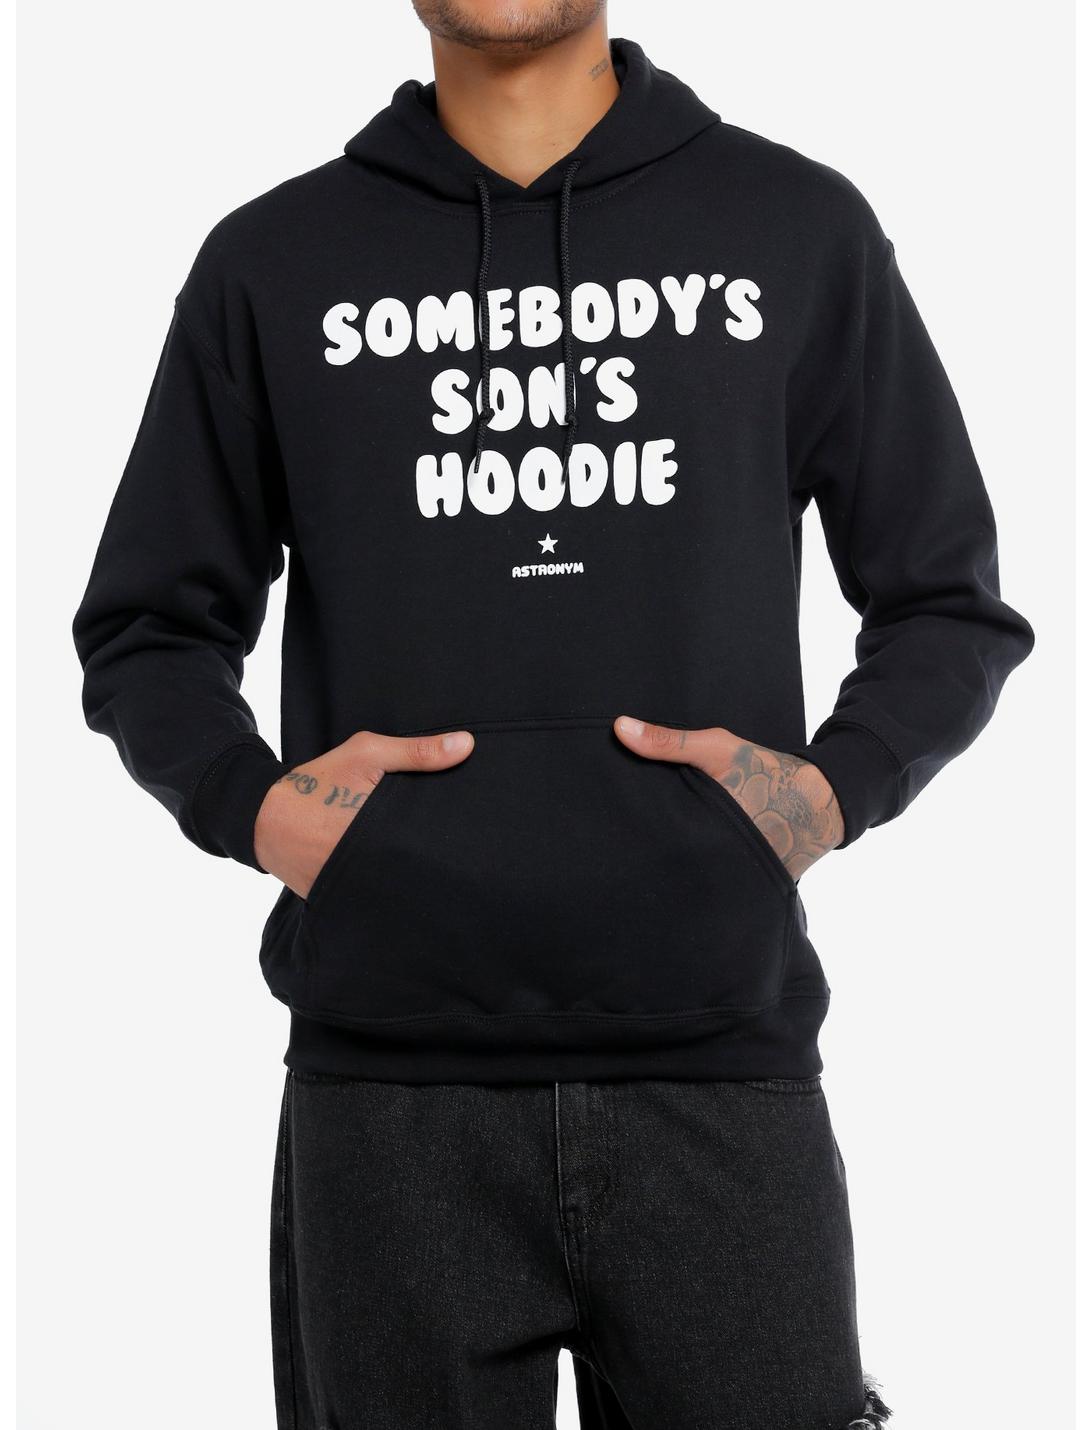 Somebody's Son's Hoodie By Astronym, BLACK, hi-res